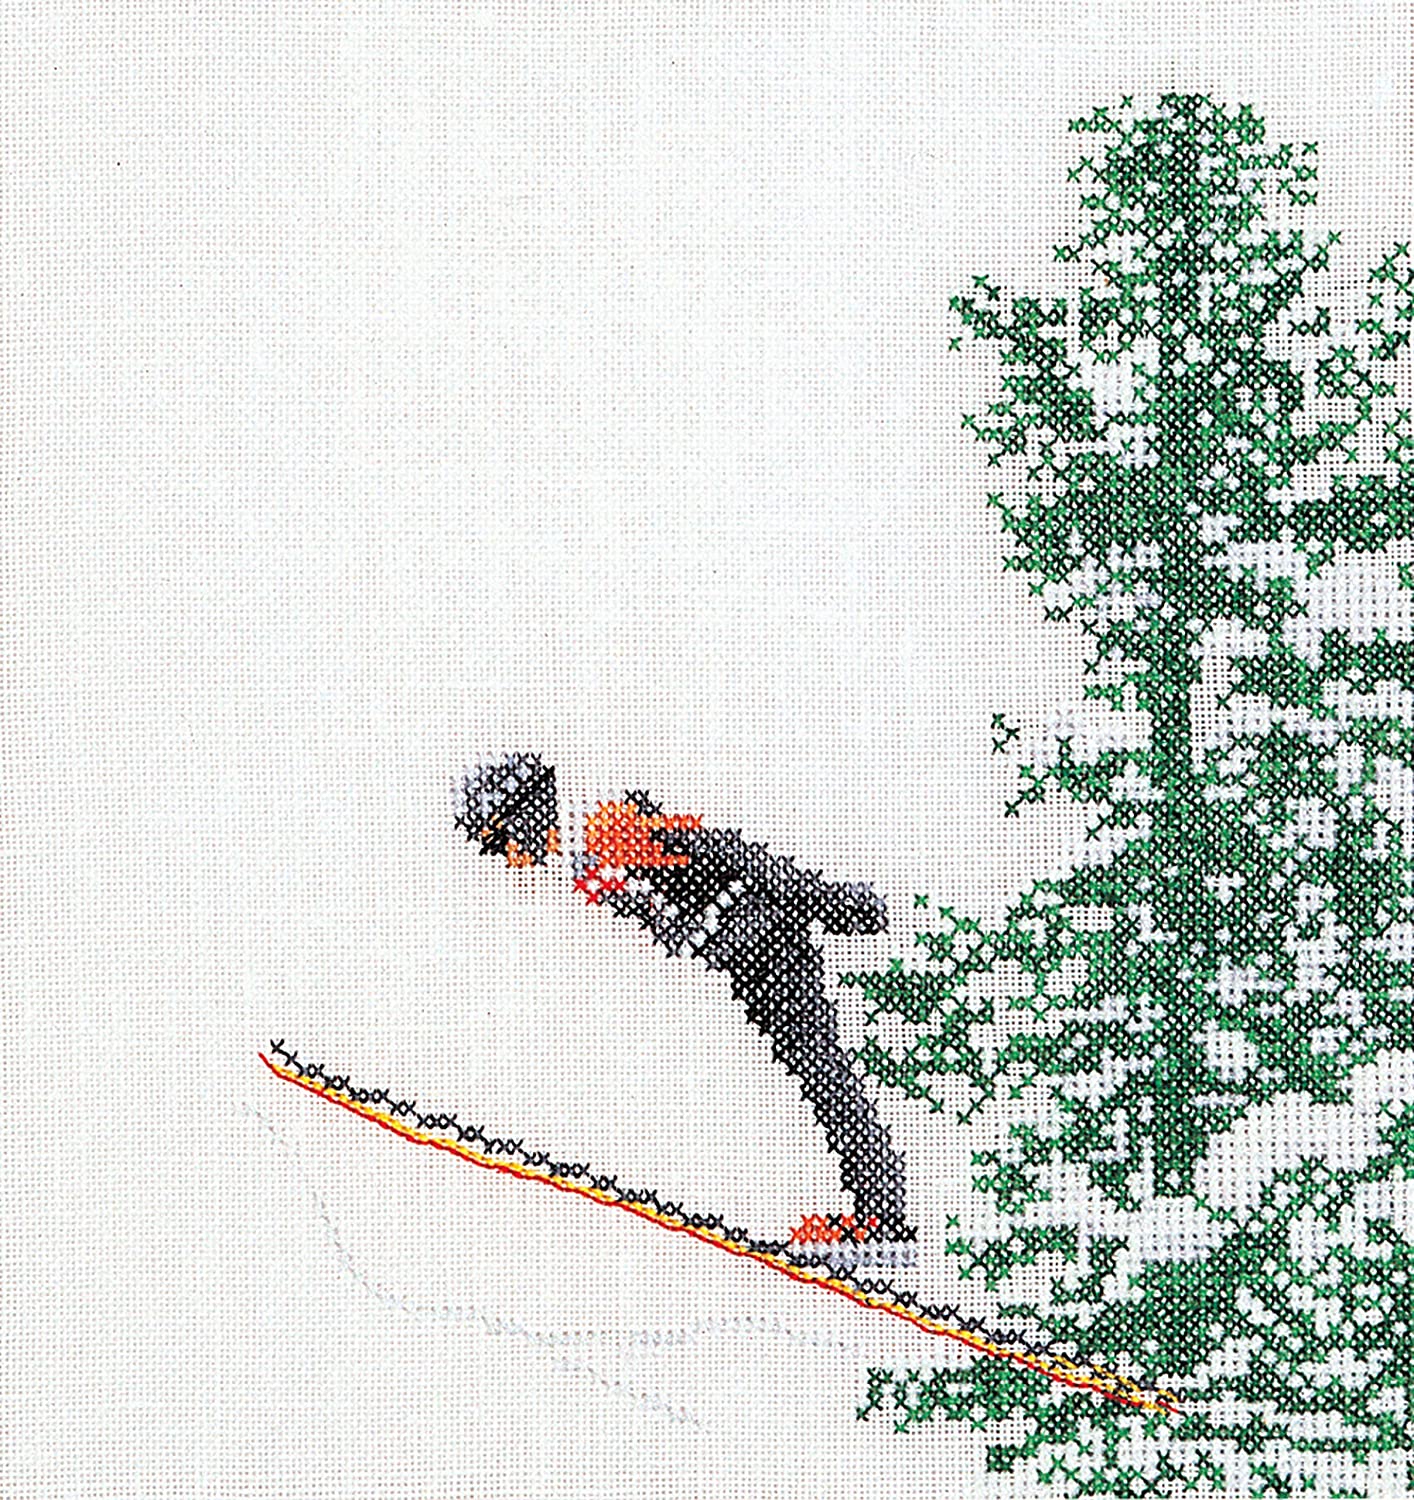 Thea Gouverneur Cross Stitch Kit - Skien / Ski Jump 3039. Counted cross stitch kit from the fabulous Thea Gouverneur in The Netherlands. This kit is available on either Aida or linen.